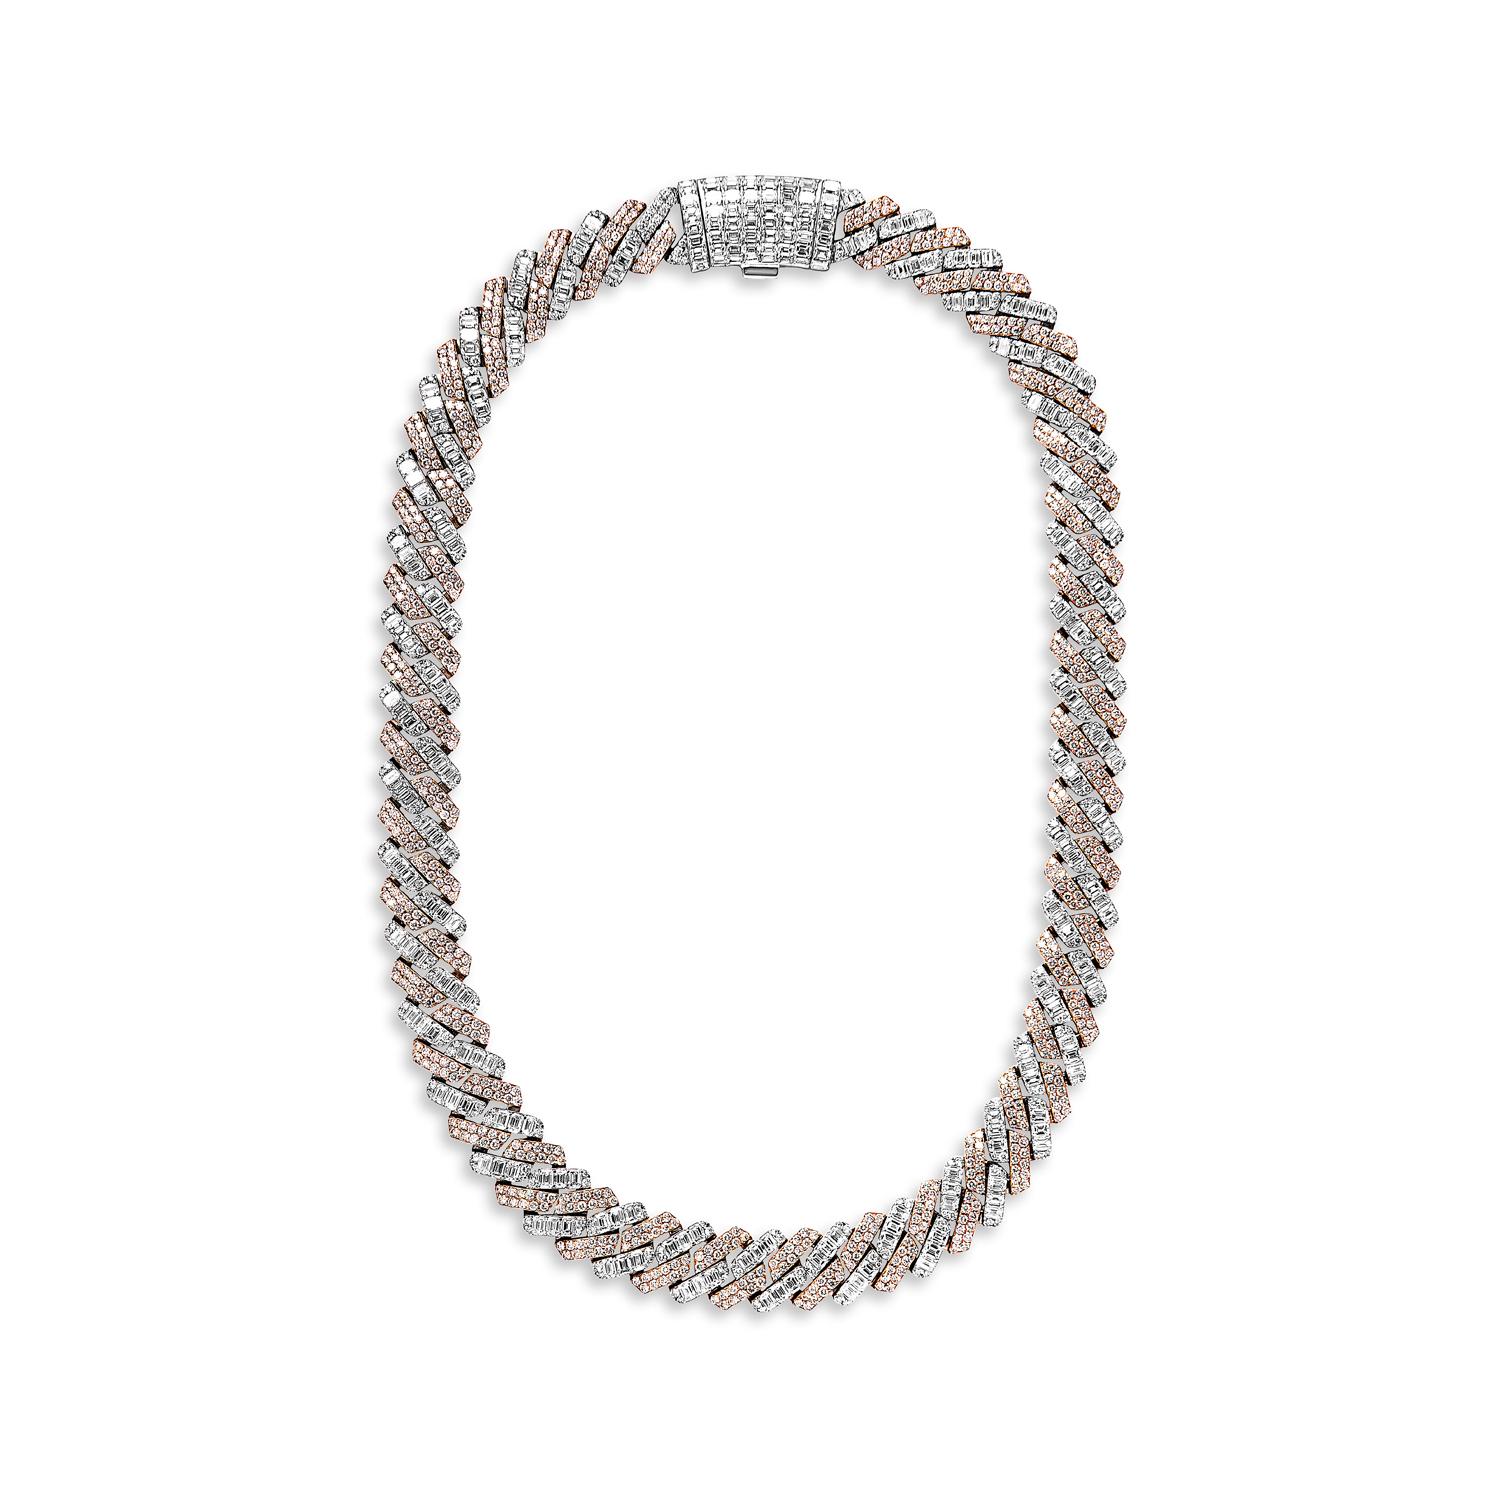 Looking for a magnificent diamond cuban link chain that is out of this world? Look no further than the Earth Mined Diamond For Male. This certified diamond is a truly stunning piece, weighing in at 64.05 carats. It is set in a 14kt white & rose gold